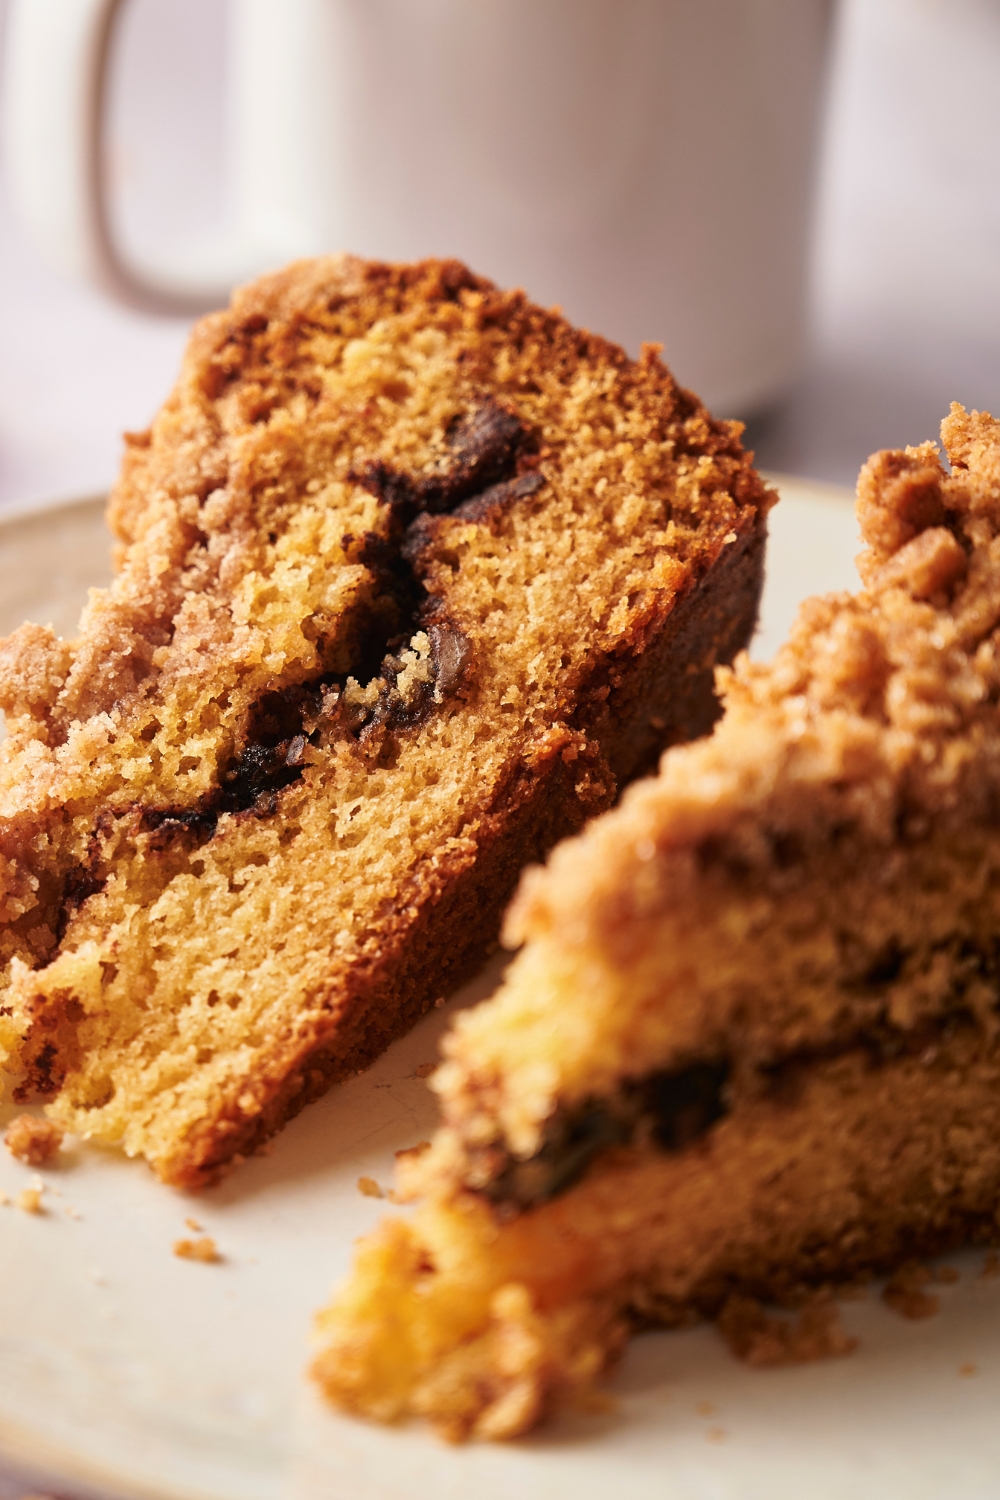 A plate with two slices of coffee cake with crumbly cinnamon sugar topping.